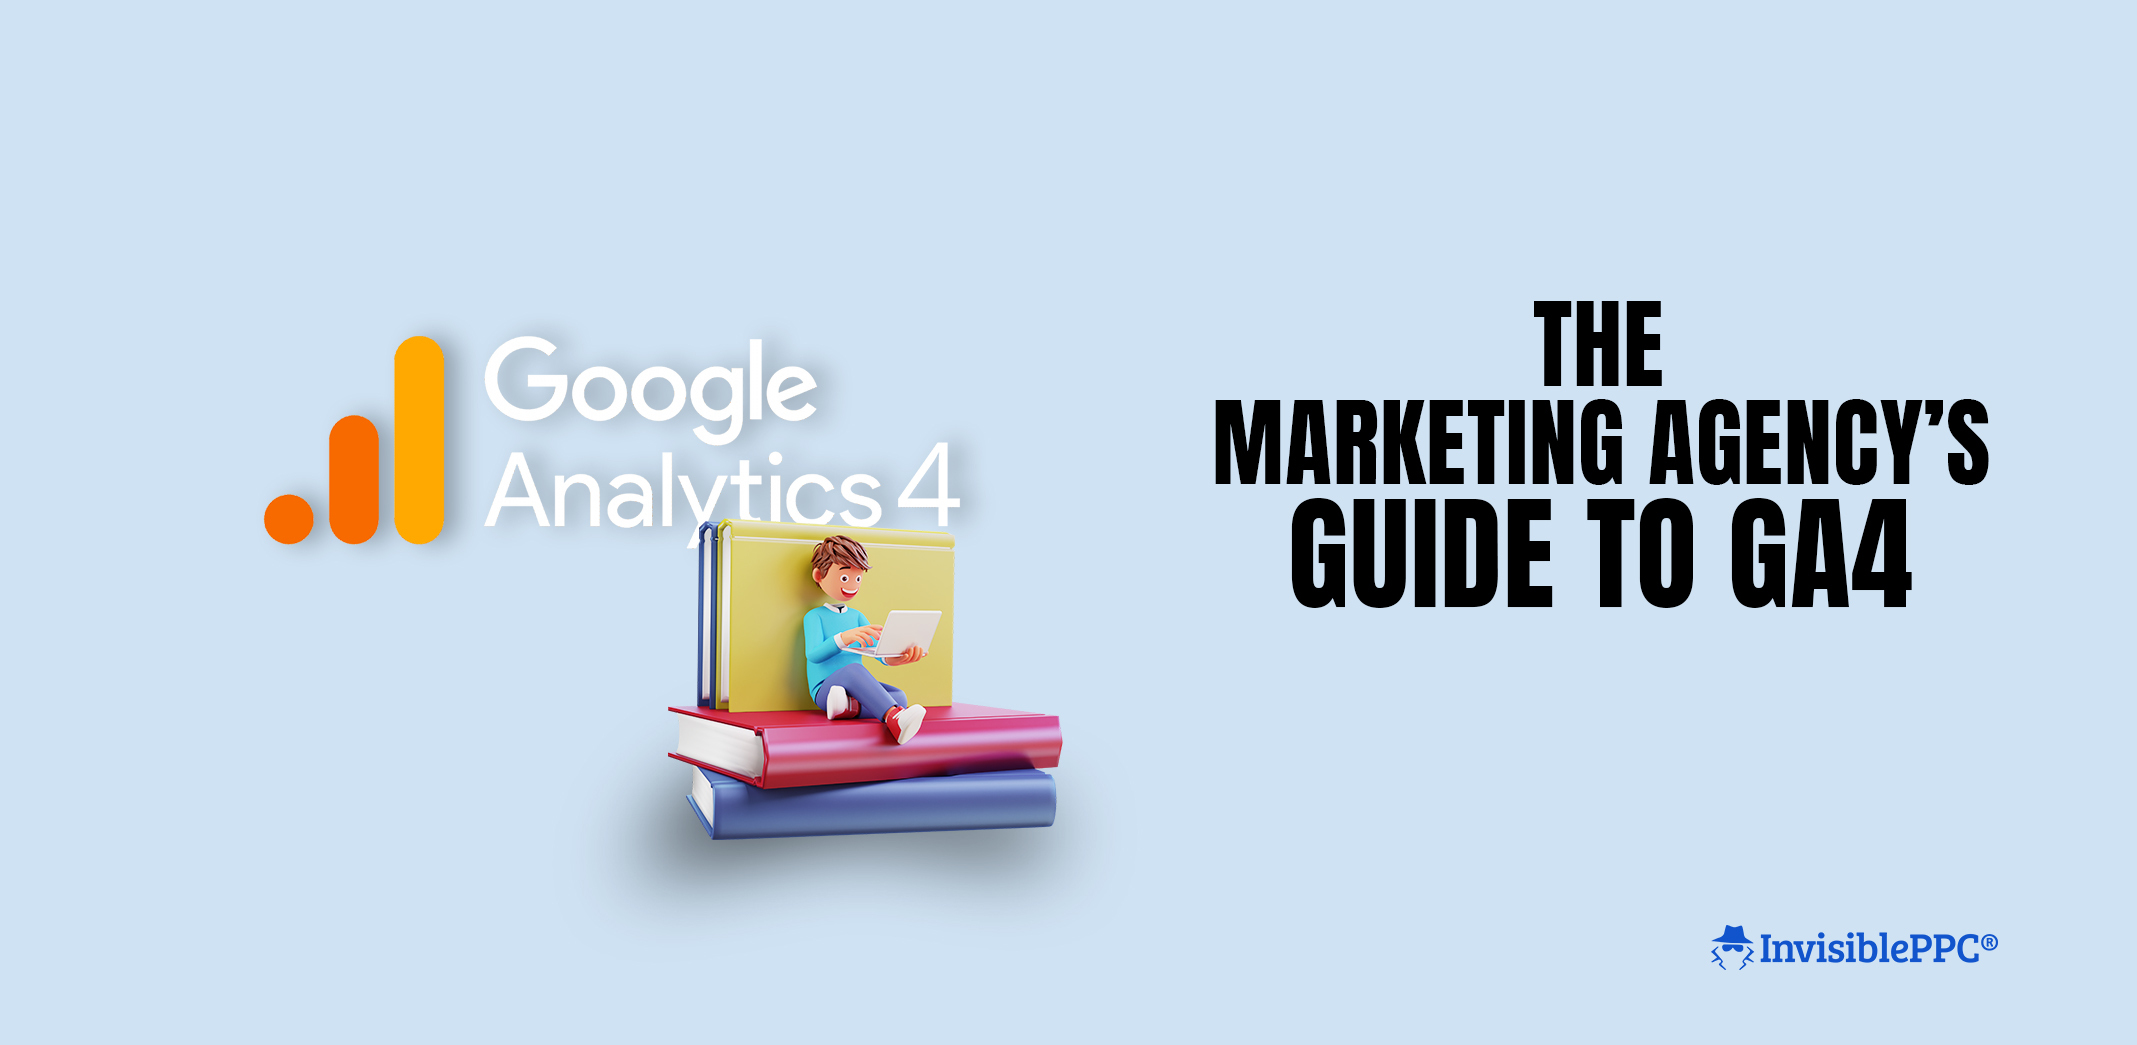 The Marketing Agency’s Guide to GA4